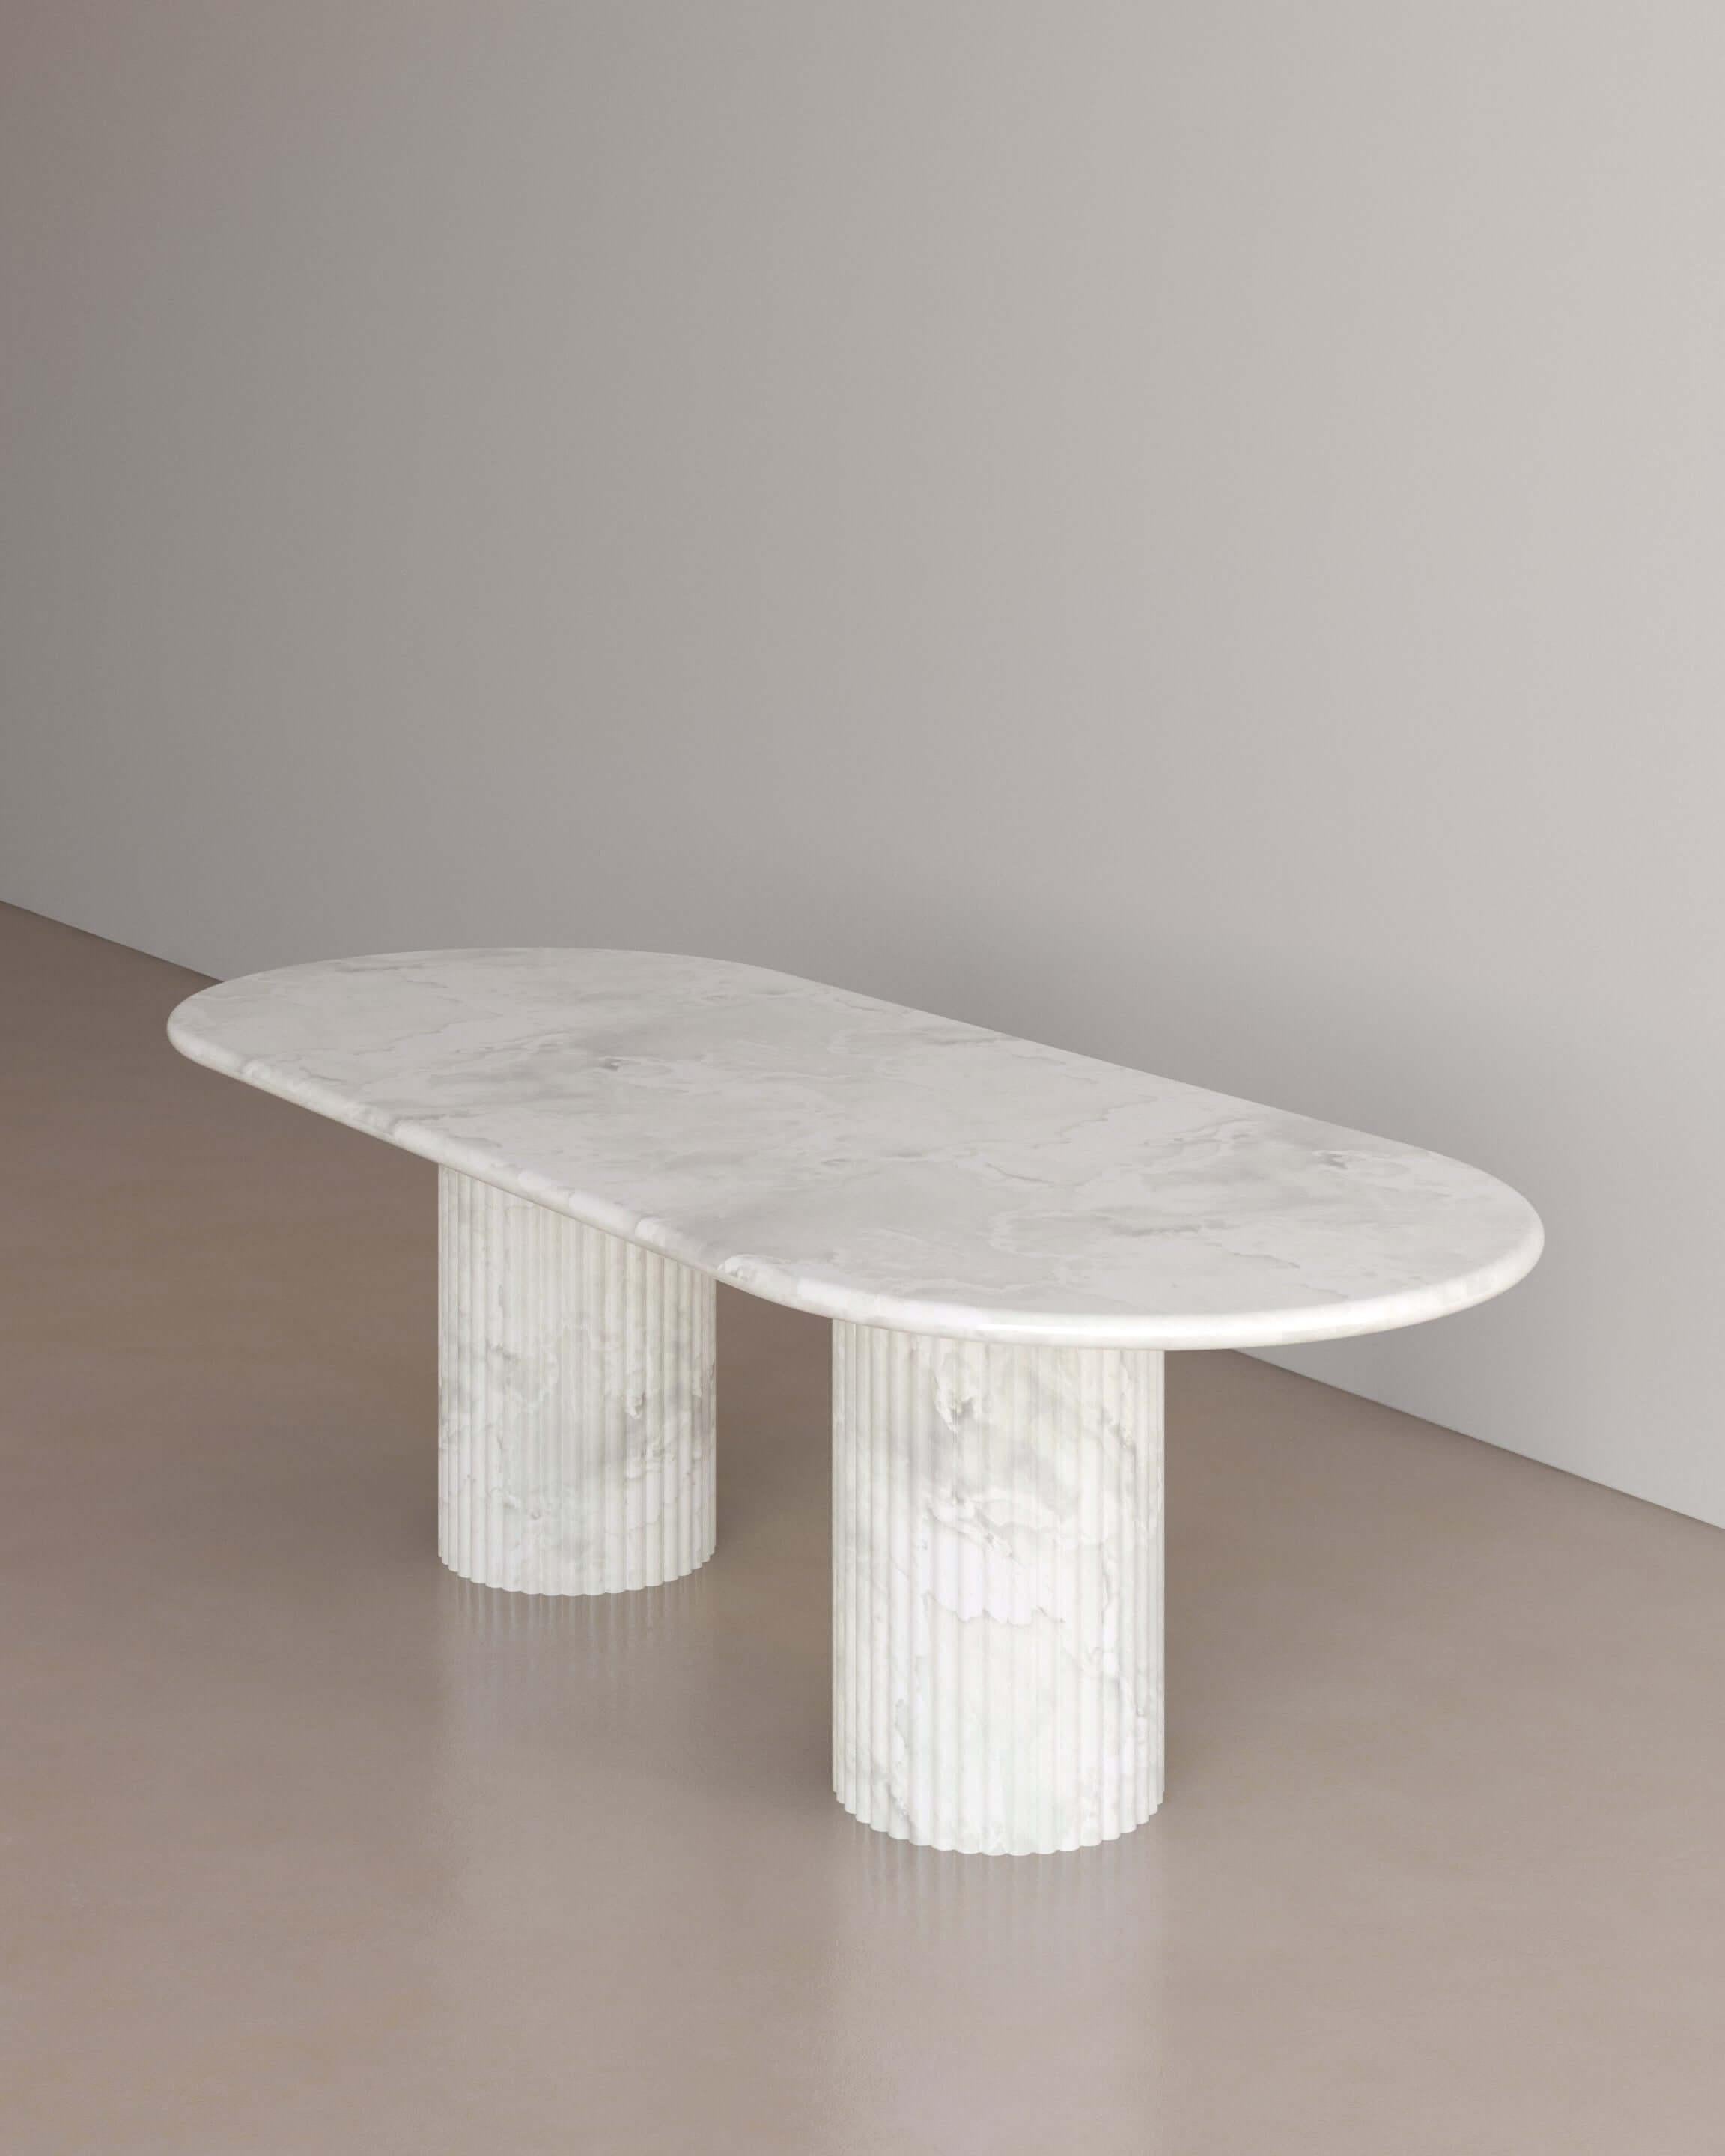 The Essentialist brings you The Antica Dining Table II in Bianco Onyx. An oval table top resolved by smooth bullnose edges rests on two supporting pillars. Architectural form is refined by artistic expression echoing Roman culture. This table,